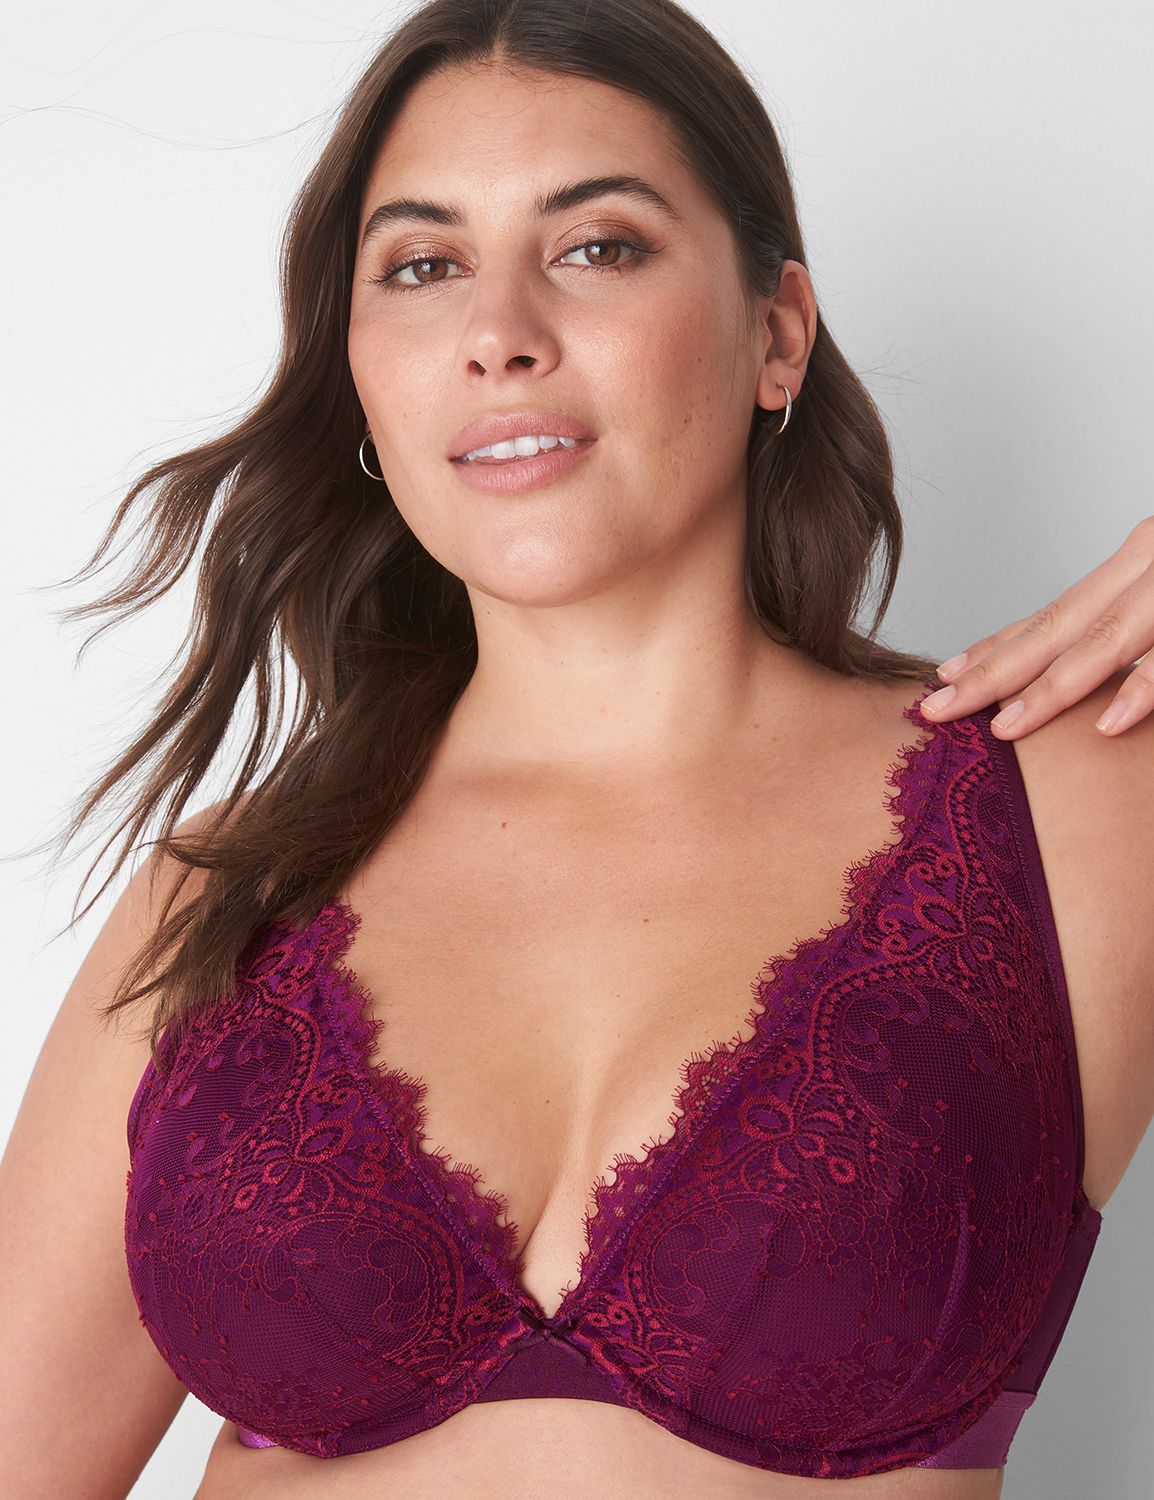 Lane Bryant - Hey, honey 🍯 New bras JUST dropped — with lots of lace and  hot-honeyed hues to sweeten your top drawer (just in time for fall). Shop